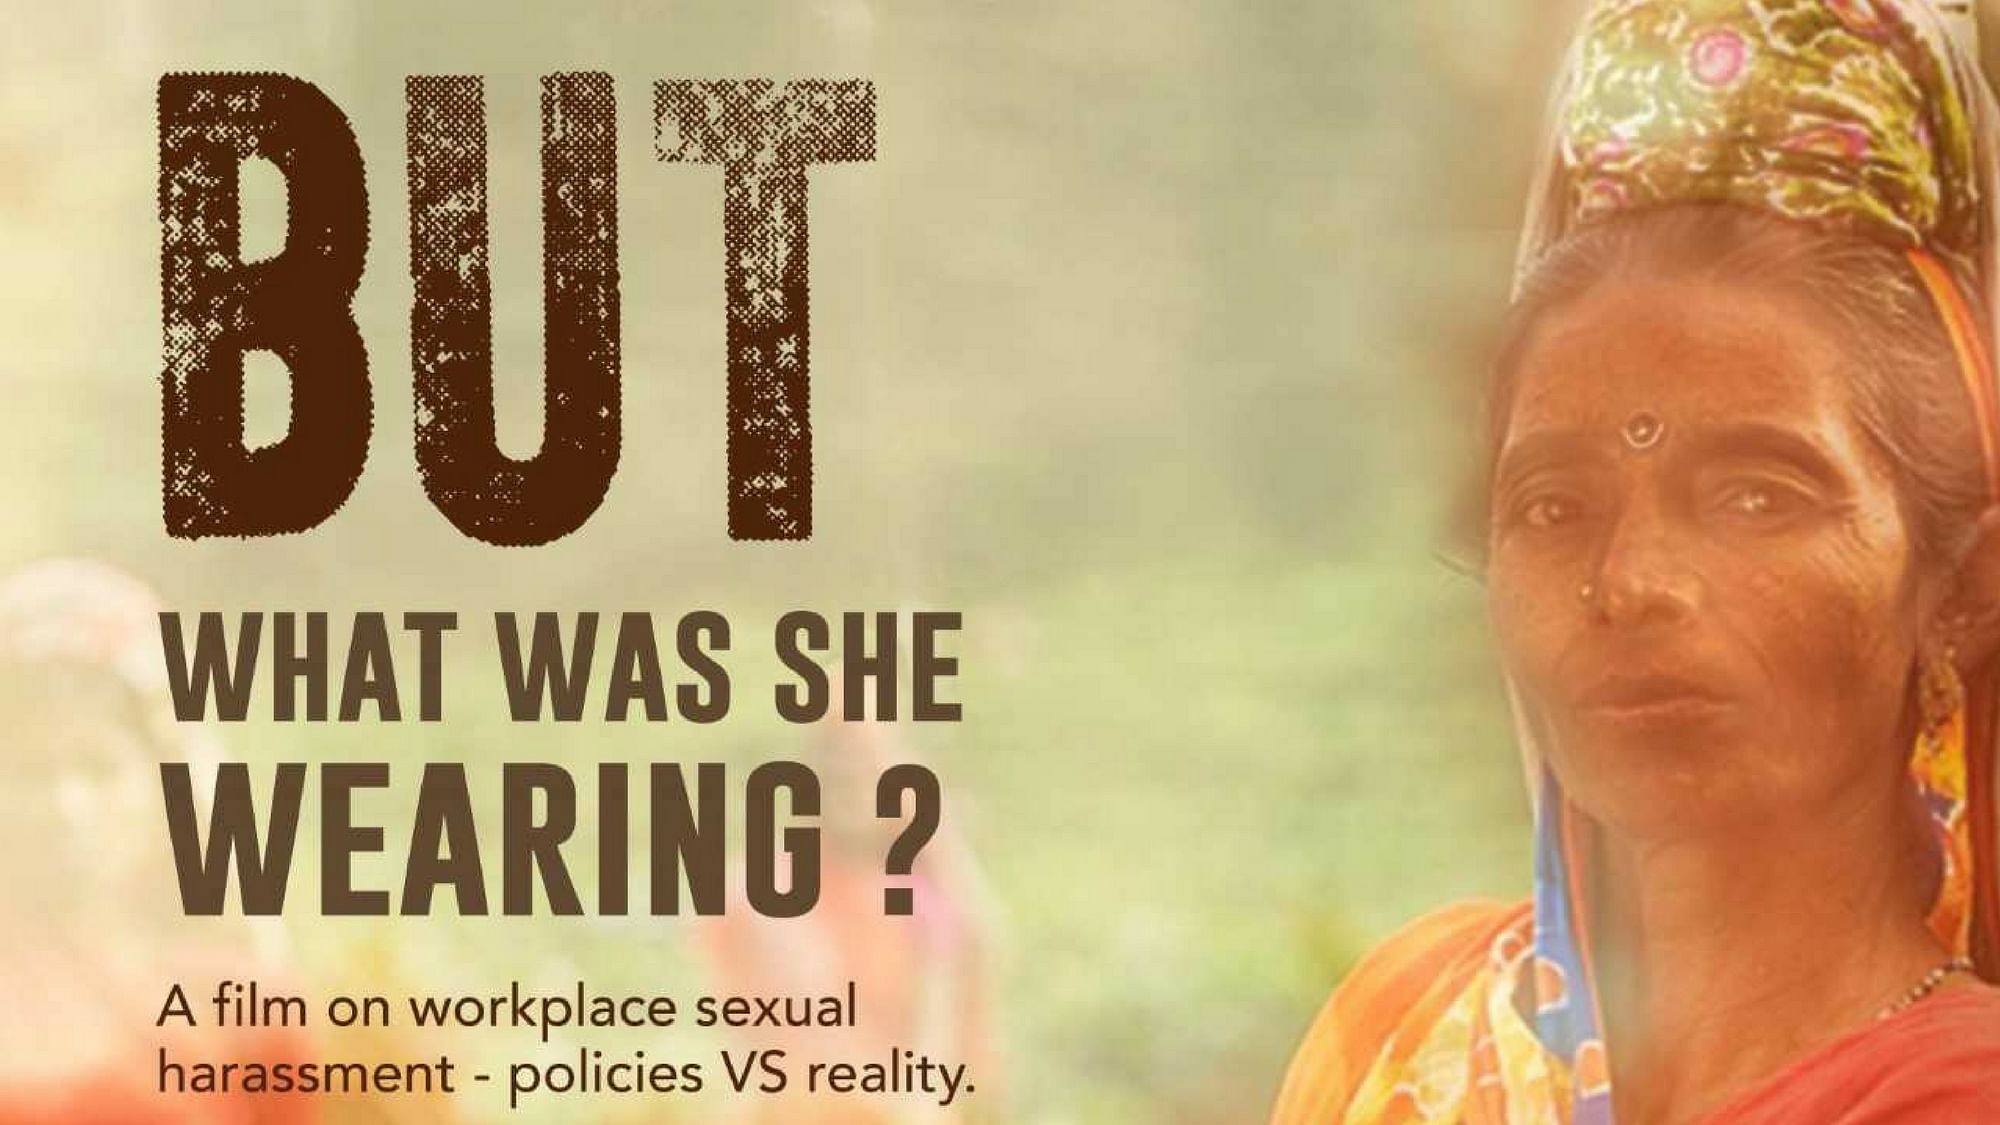 Vaishnavi is making India’s first feature length documentary on workplace sexual harassment.